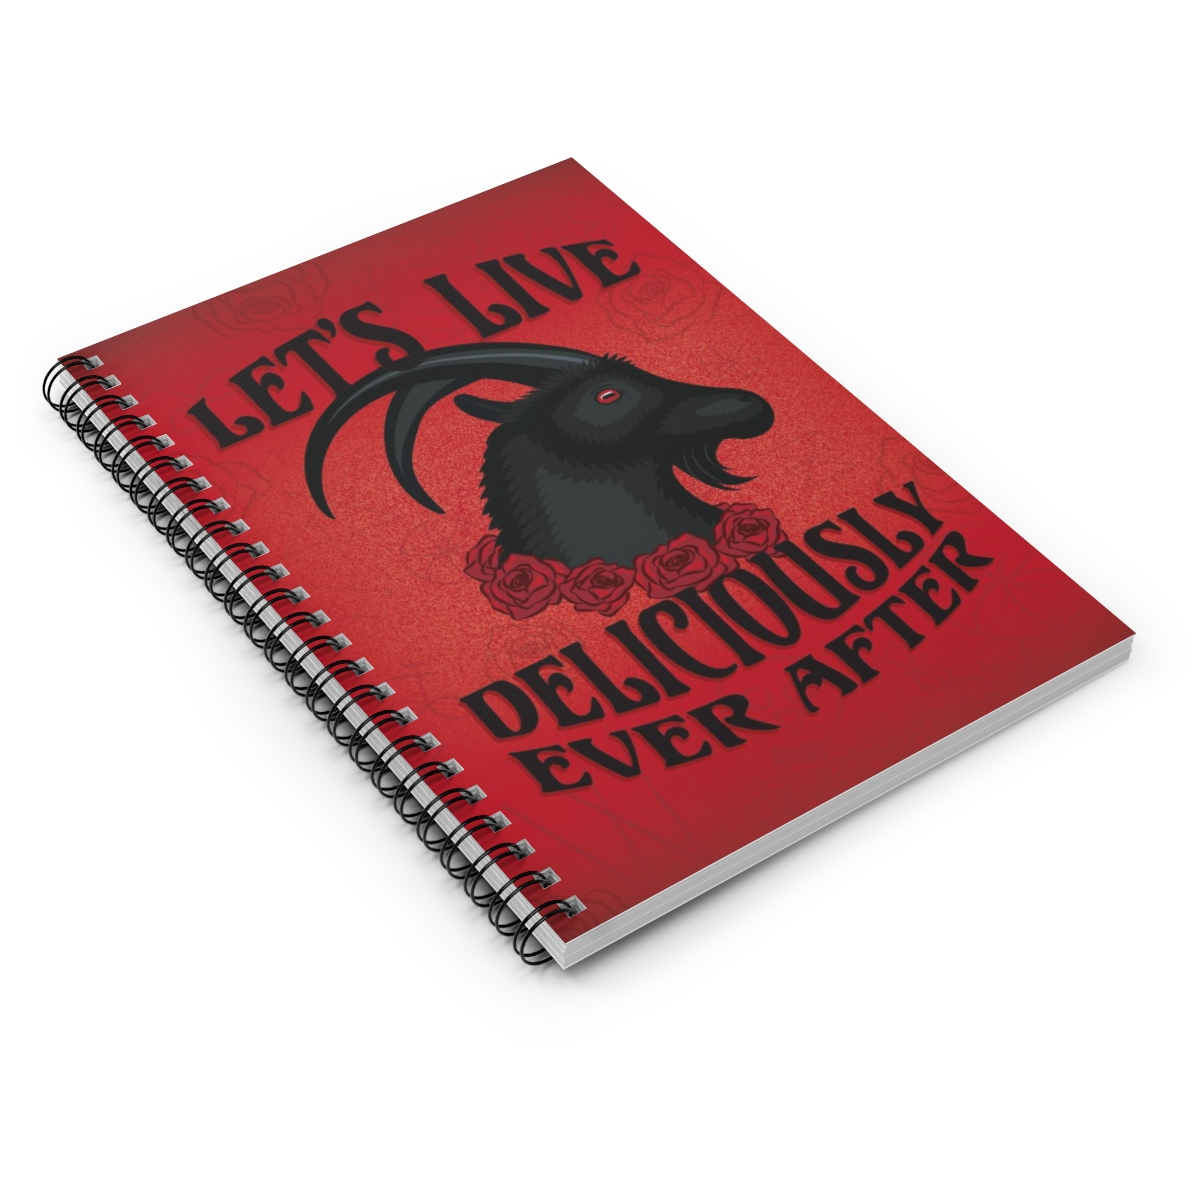 Let's Live Deliciously Ever After spiral notebook product thumbnail image